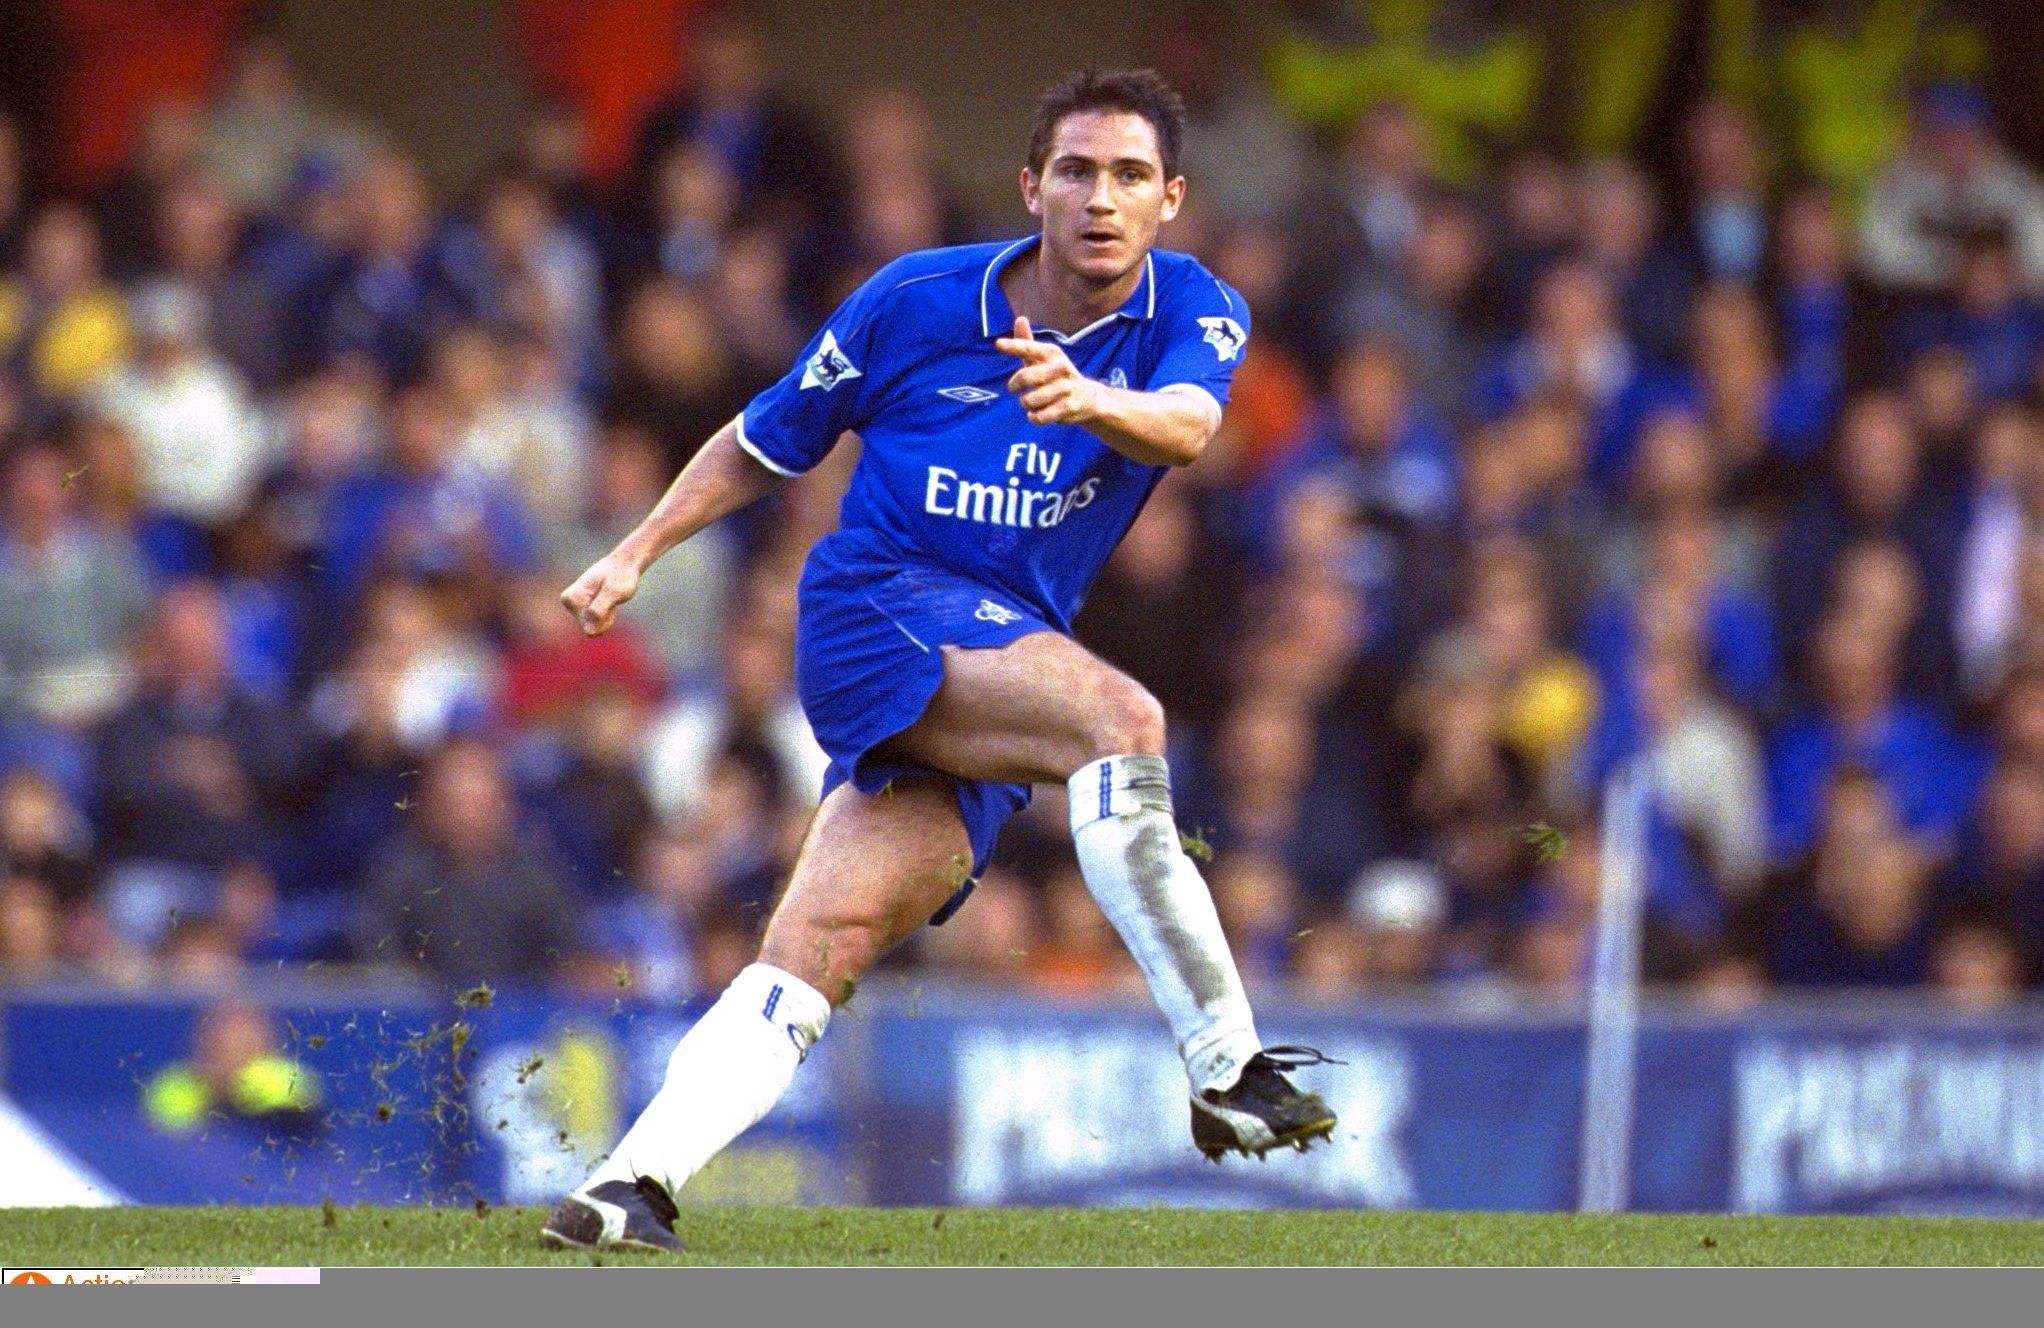 Football - F.A Barclaycard Premiership , Chelsea v Ipswich Town , 4/11/01 
Frank Lampard - Chelsea  
Mandatory Credit:Action Images / Andy Couldridge